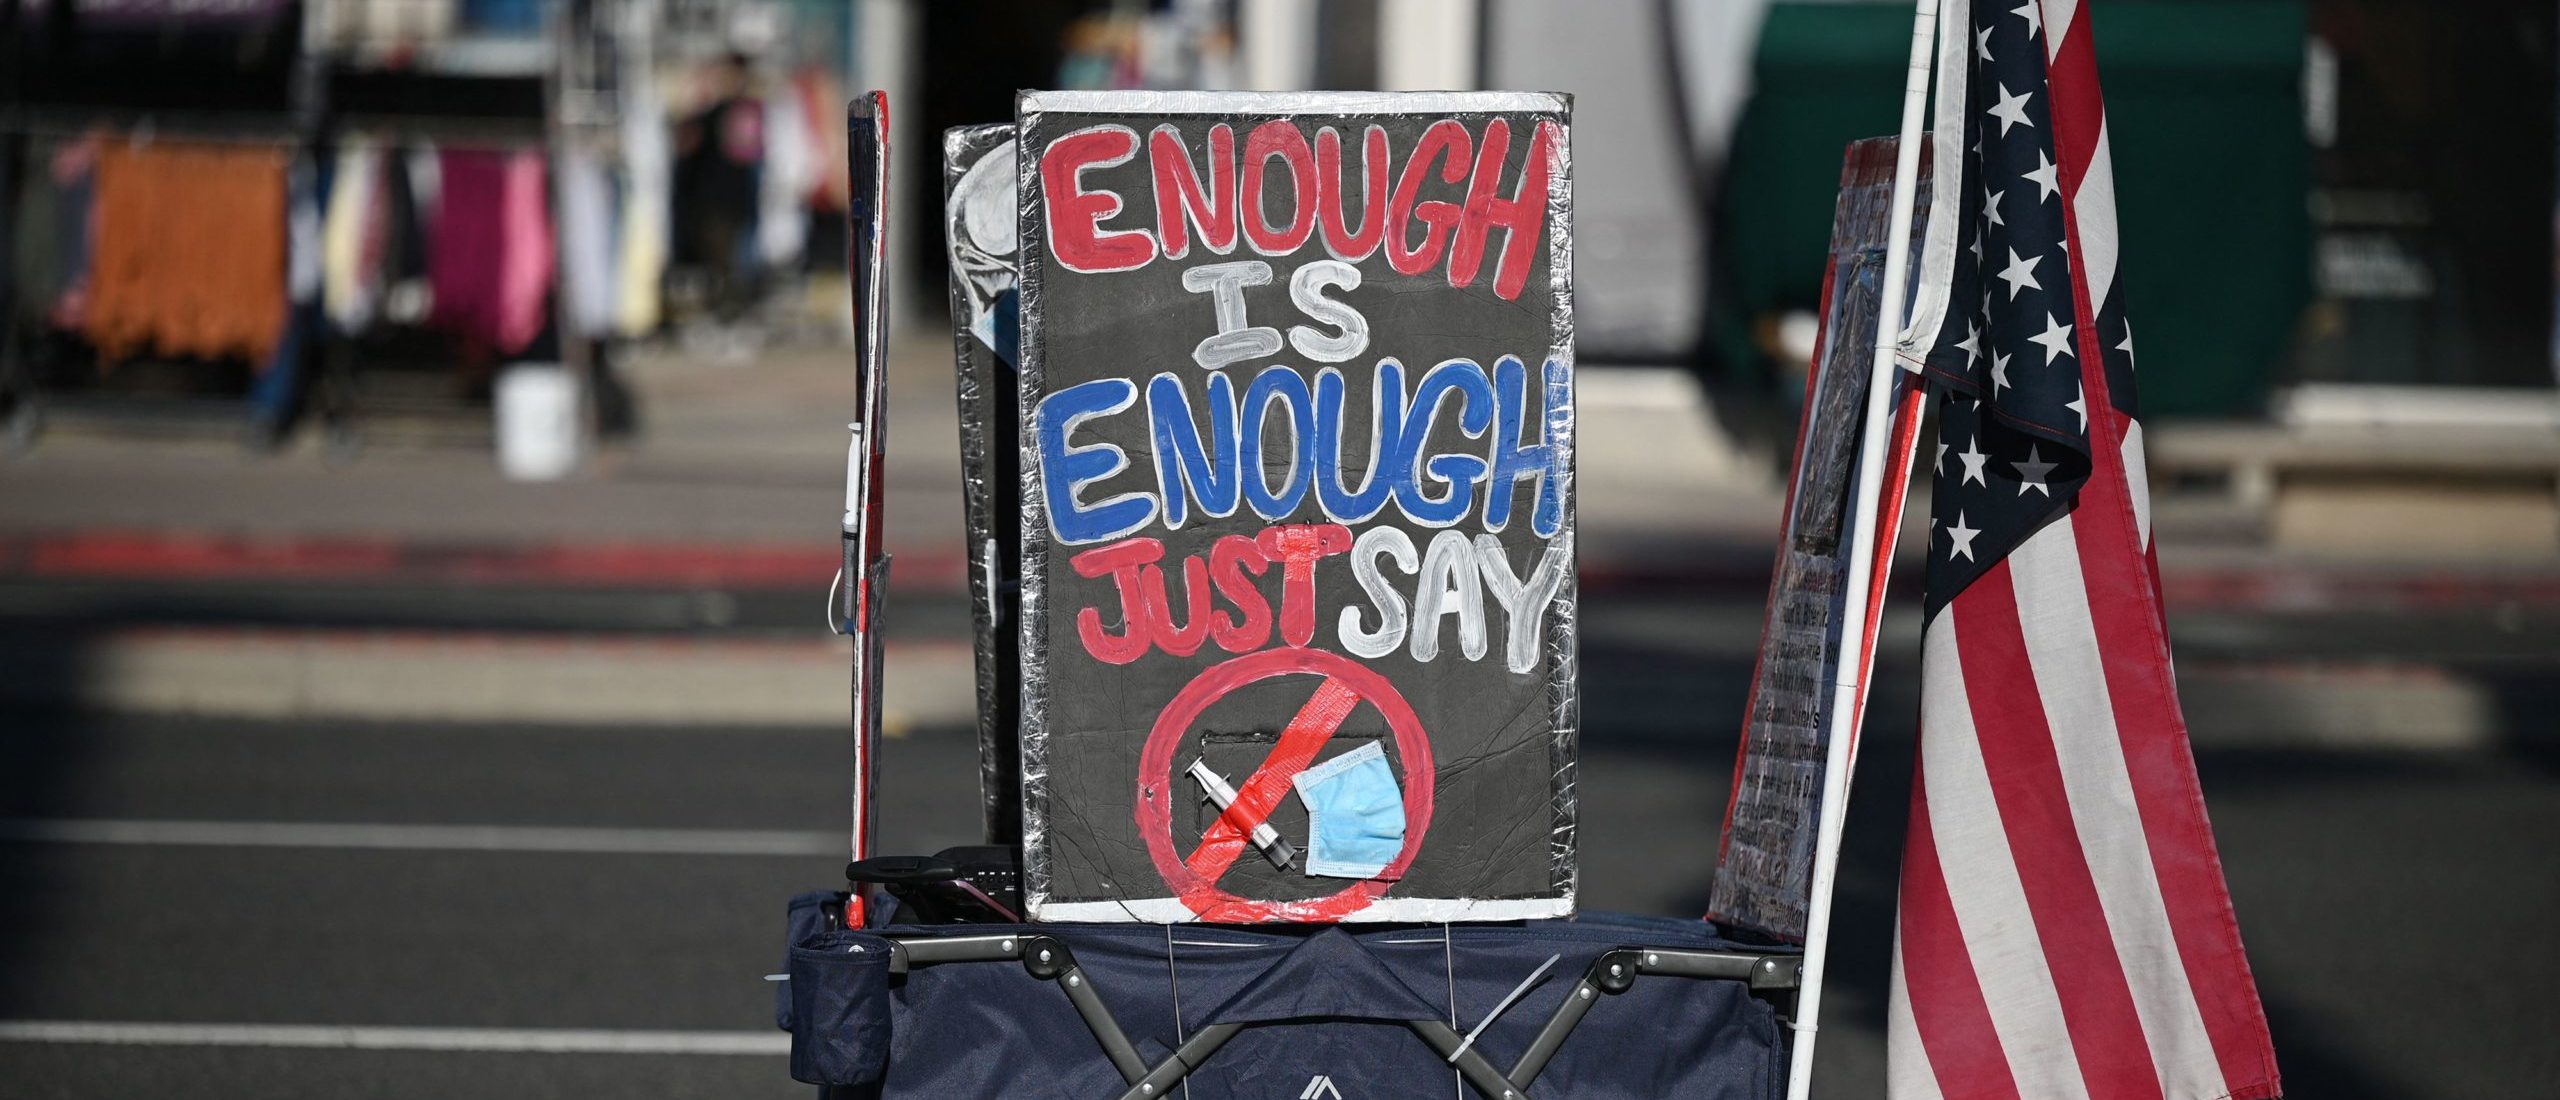 A display of a face mask and syringe with a circle and red line through it are seen at a protest against Covid-19 vaccine mandates for students, in Huntington Beach, California on January 3, 2022. - The Los Angeles Unified School District (LAUSD) announced in mid-December its decision to delay until fall 2022 its Covid-19 vaccine mandate for students 12 and older who attend class in person. The original deadline for in-person students to show proof of full vaccination was January 10, 2022. (Photo by Robyn Beck / AFP) (Photo by ROBYN BECK/AFP via Getty Images)